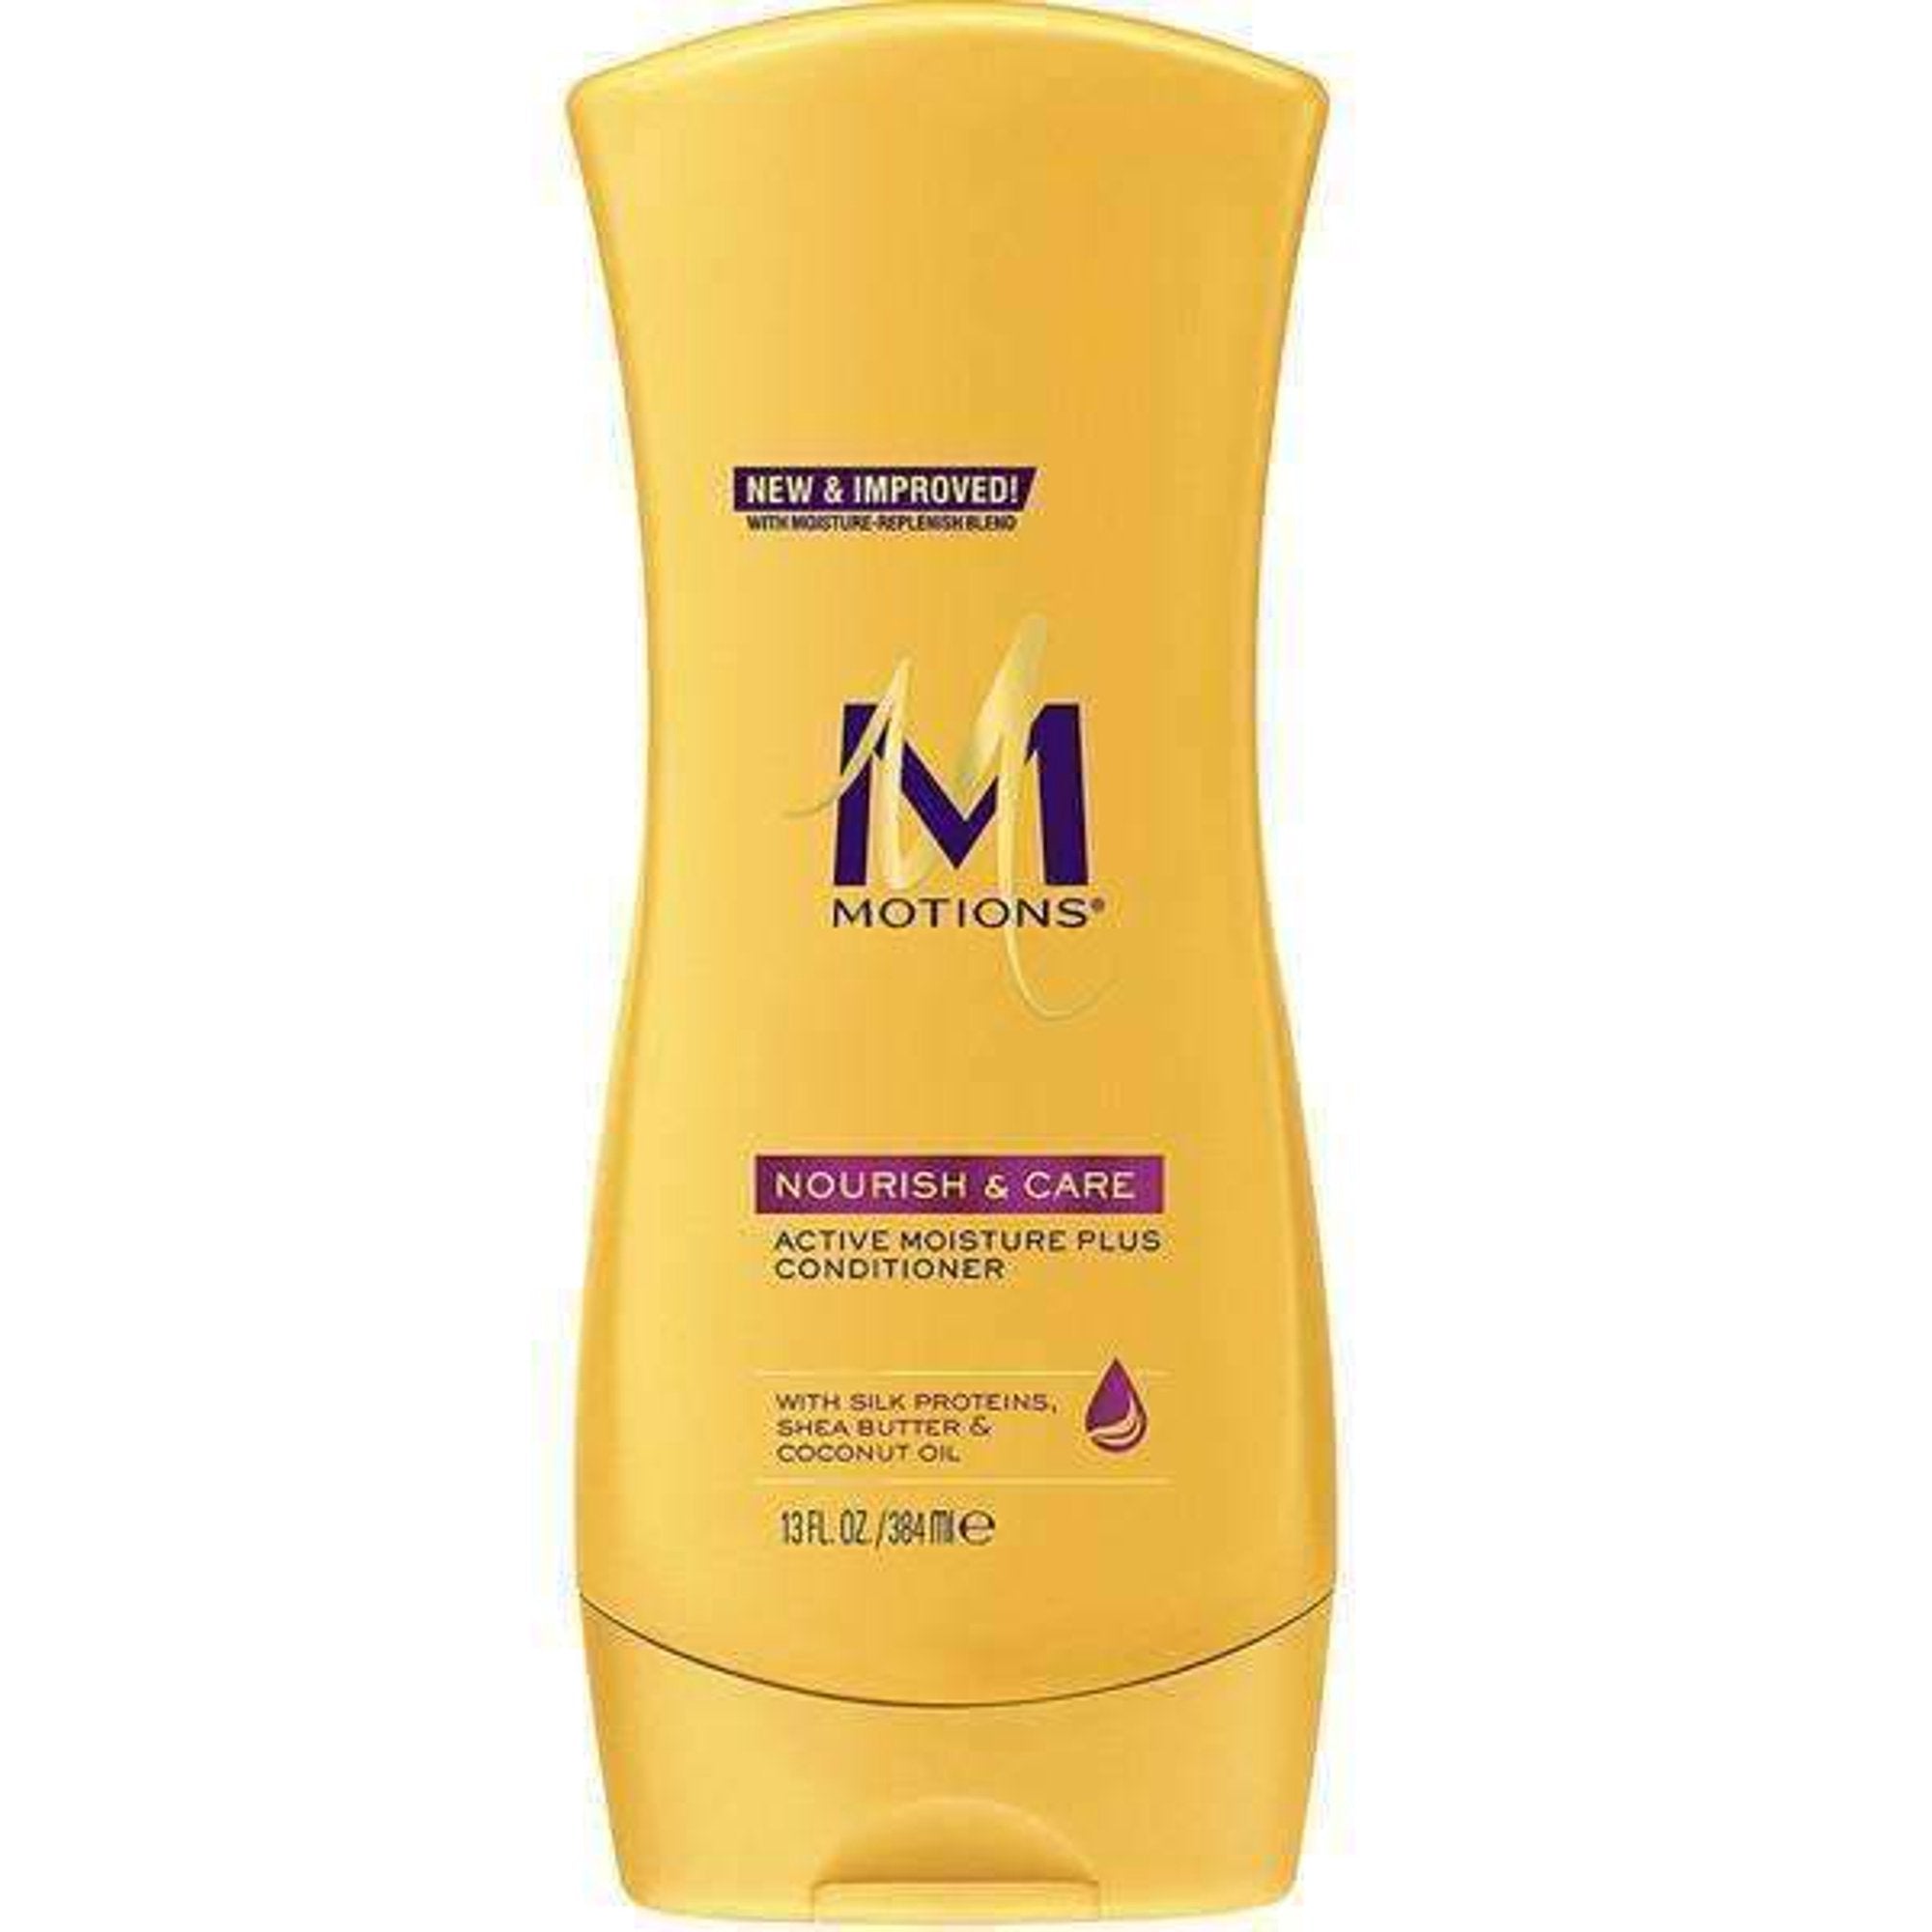 MOTIONS ACTIVE MOISTURE PLUS CONDITIONER 13oz-Motions- Hive Beauty Supply